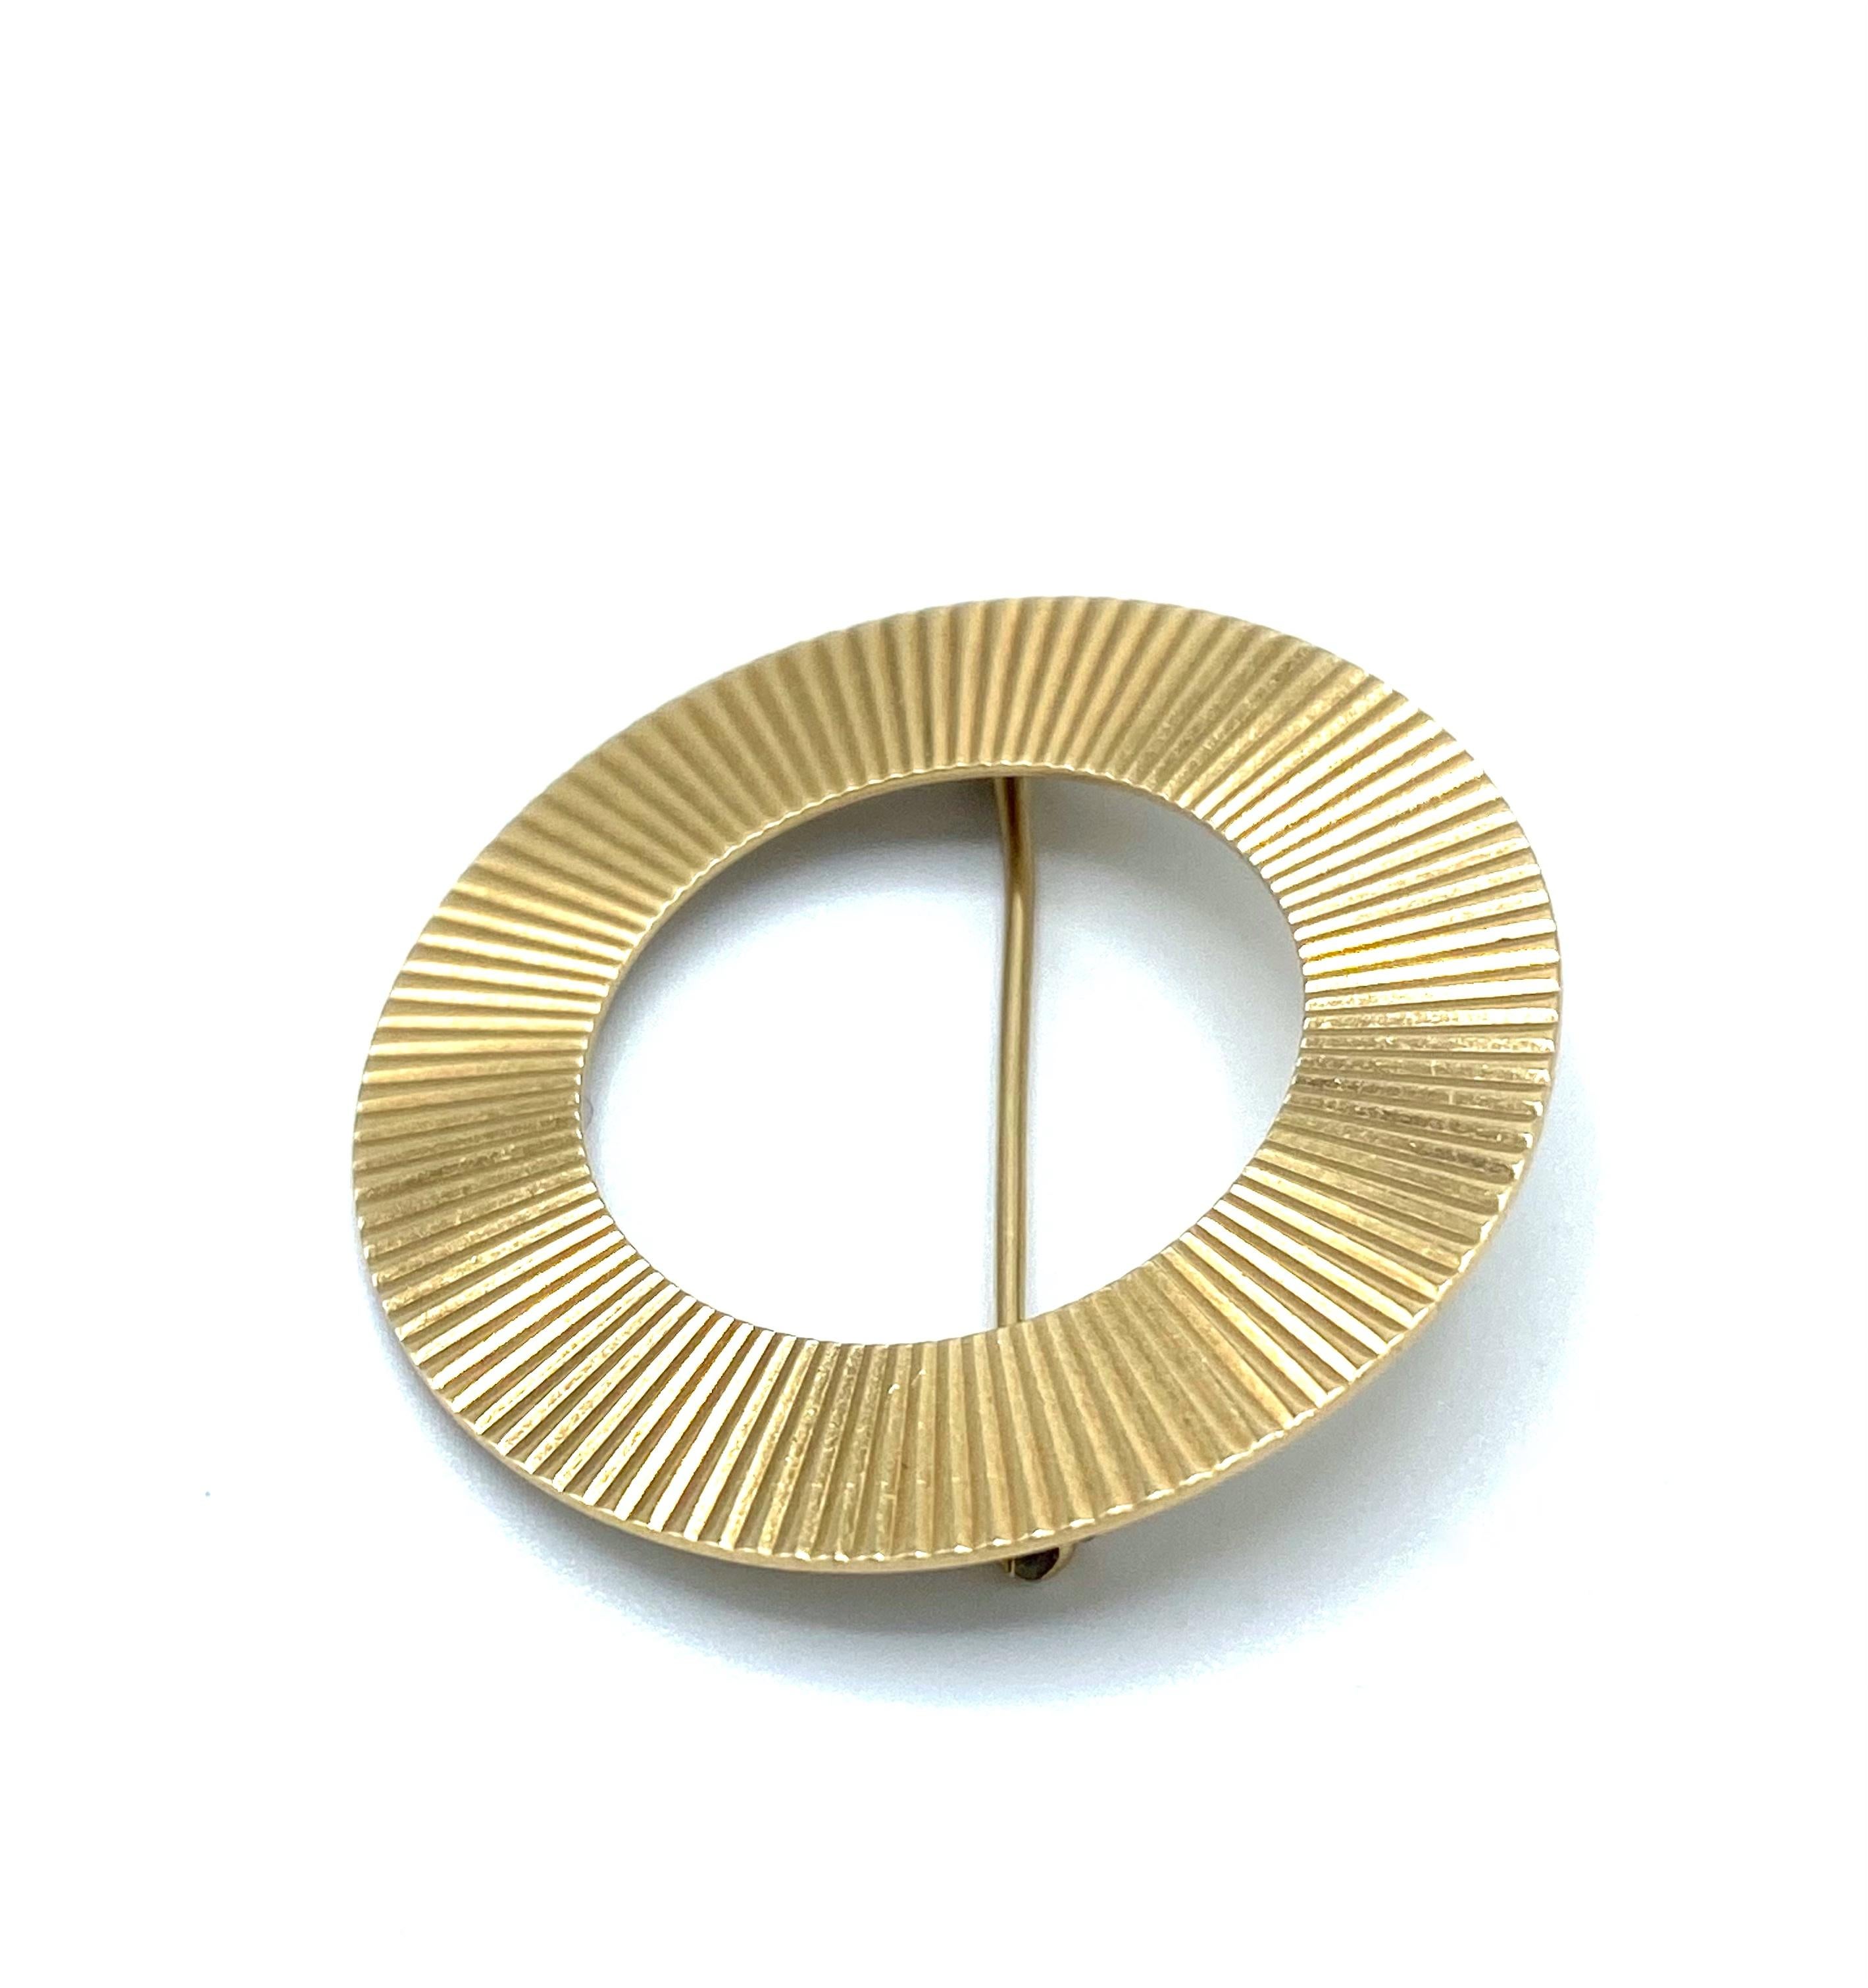 Product details:

The brooch is designed by Tiffany and Co. It is made out of 14 karat yellow gold with striped pattern finish.

Measurements: the diameter is 1.25